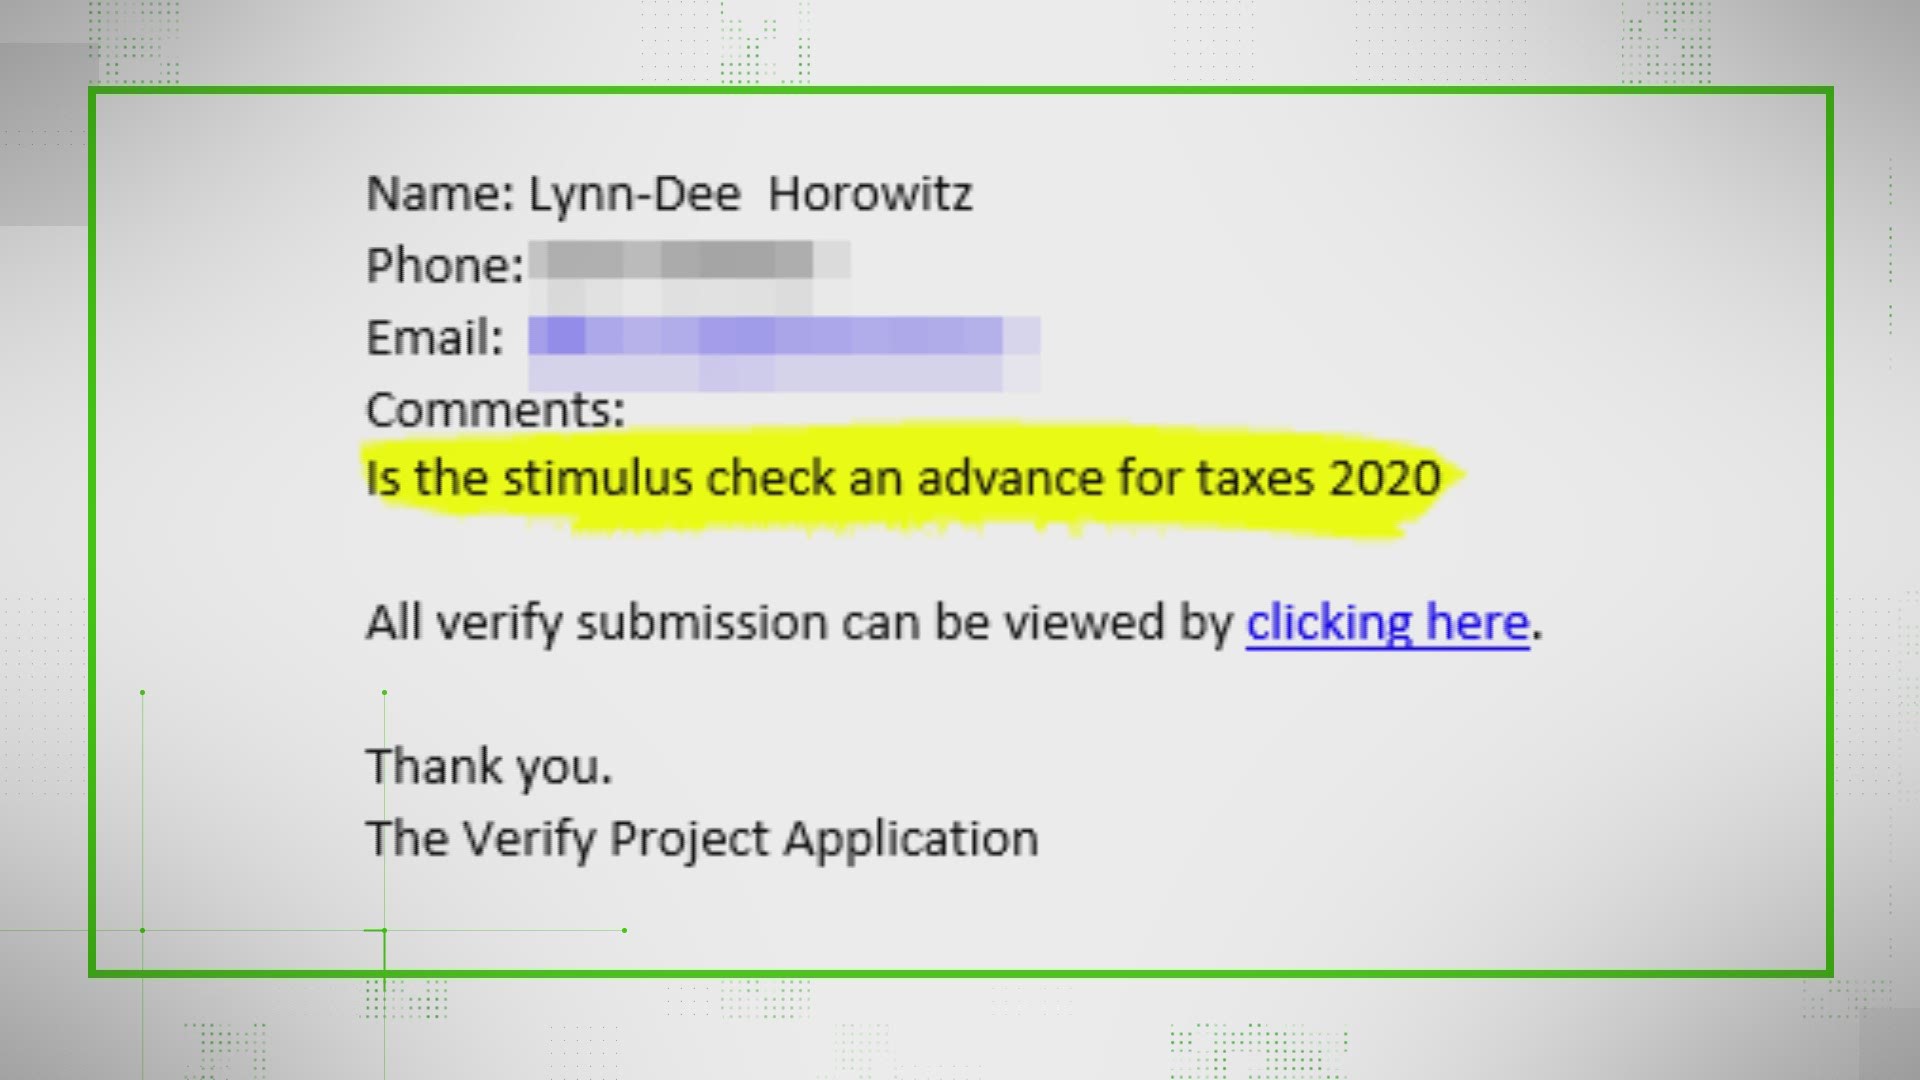 The stimulus checks are actually an advance "credit" on your 2020 taxes. So you won't have to pay them back and they aren't taxed!